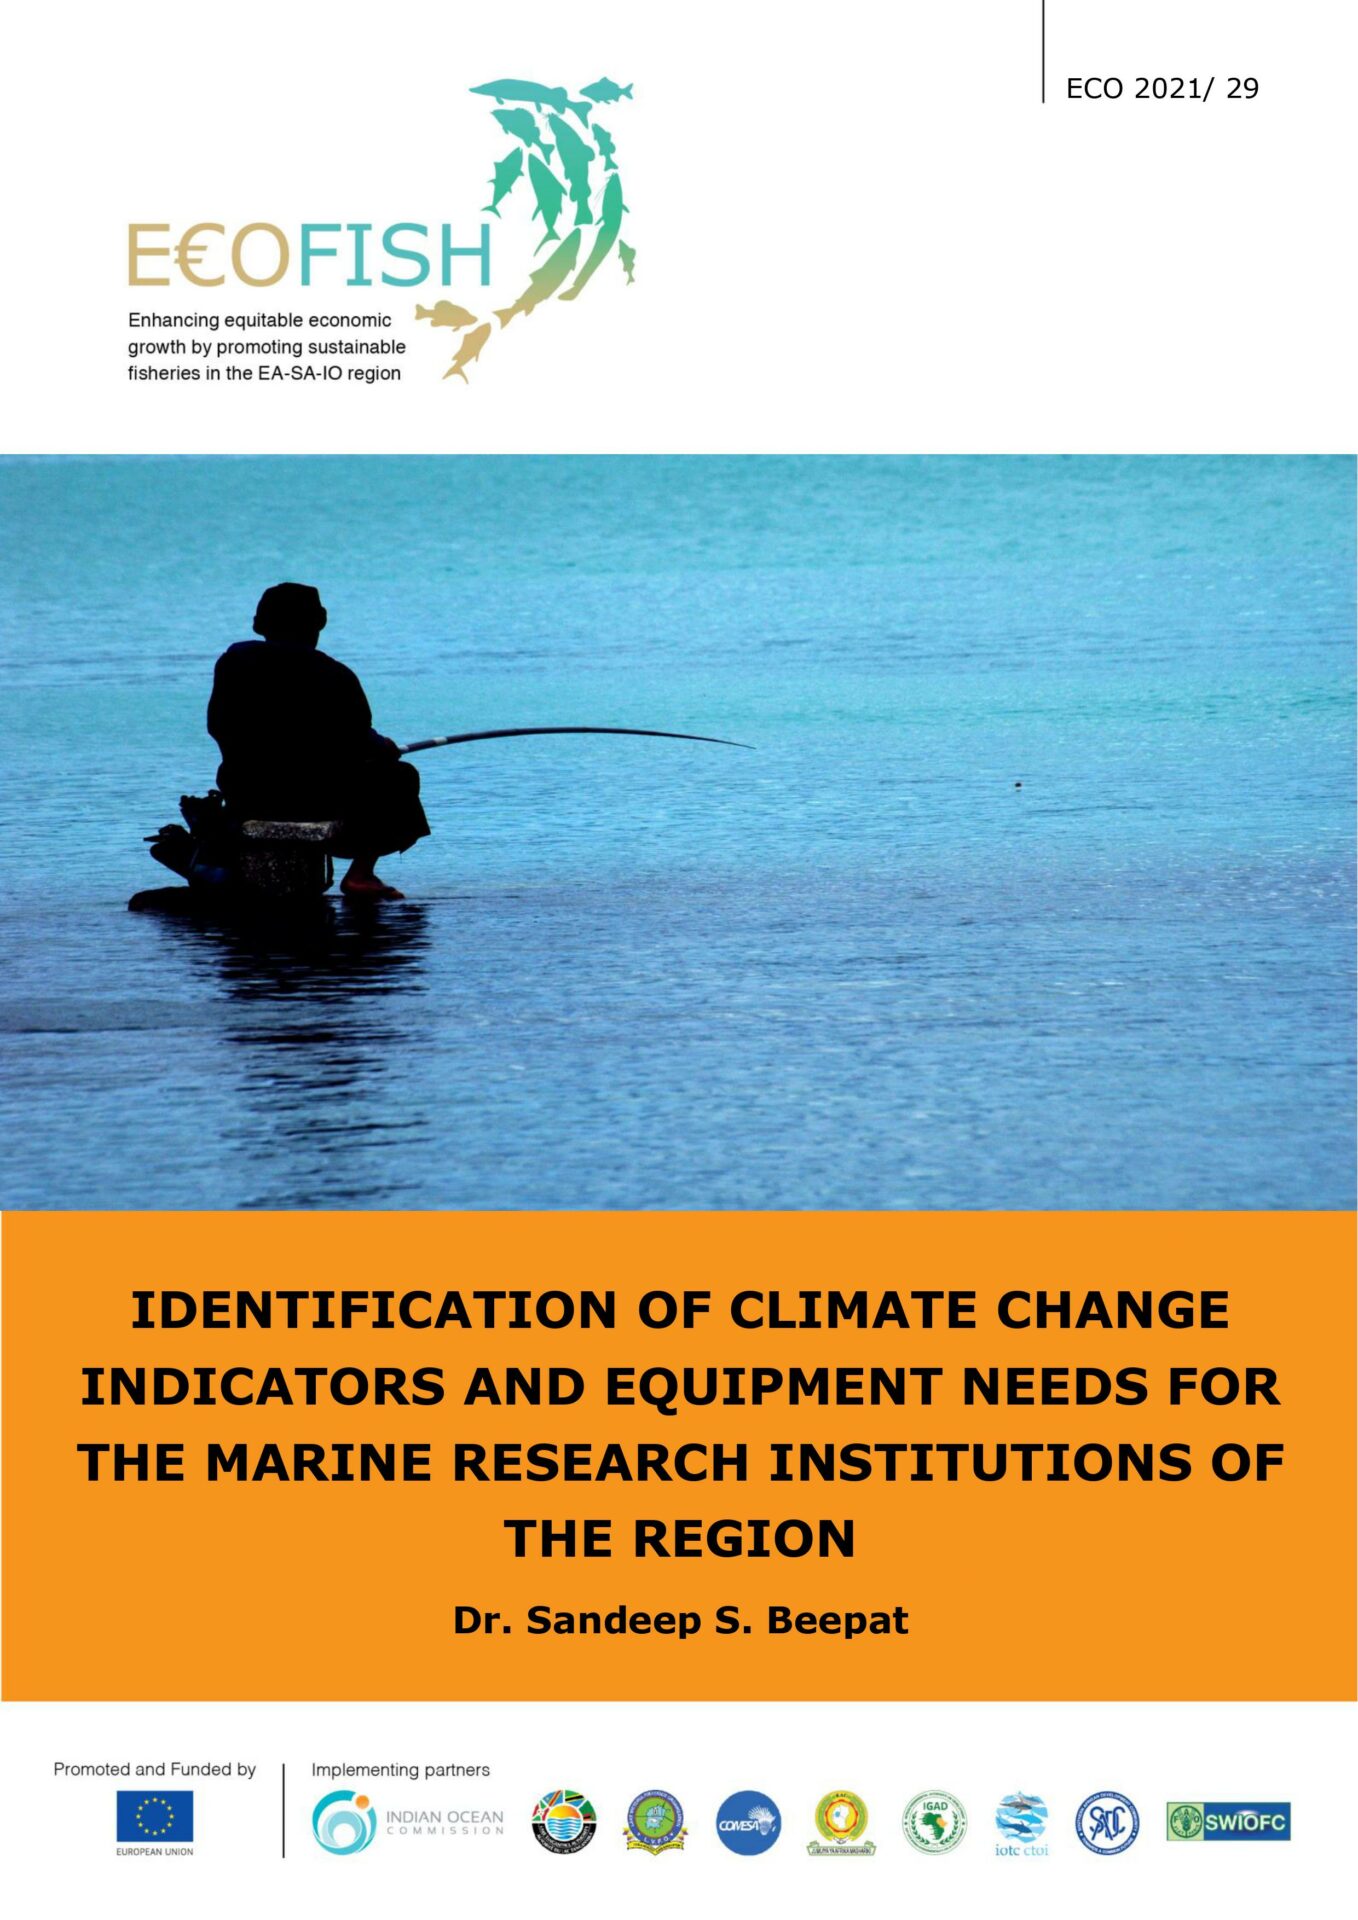 IDENTIFICATION OF CLIMATE CHANGE INDICATORS AND EQUIPMENT NEEDS FOR THE MARINE RESEARCH INSTITUTIONS OF THE REGION